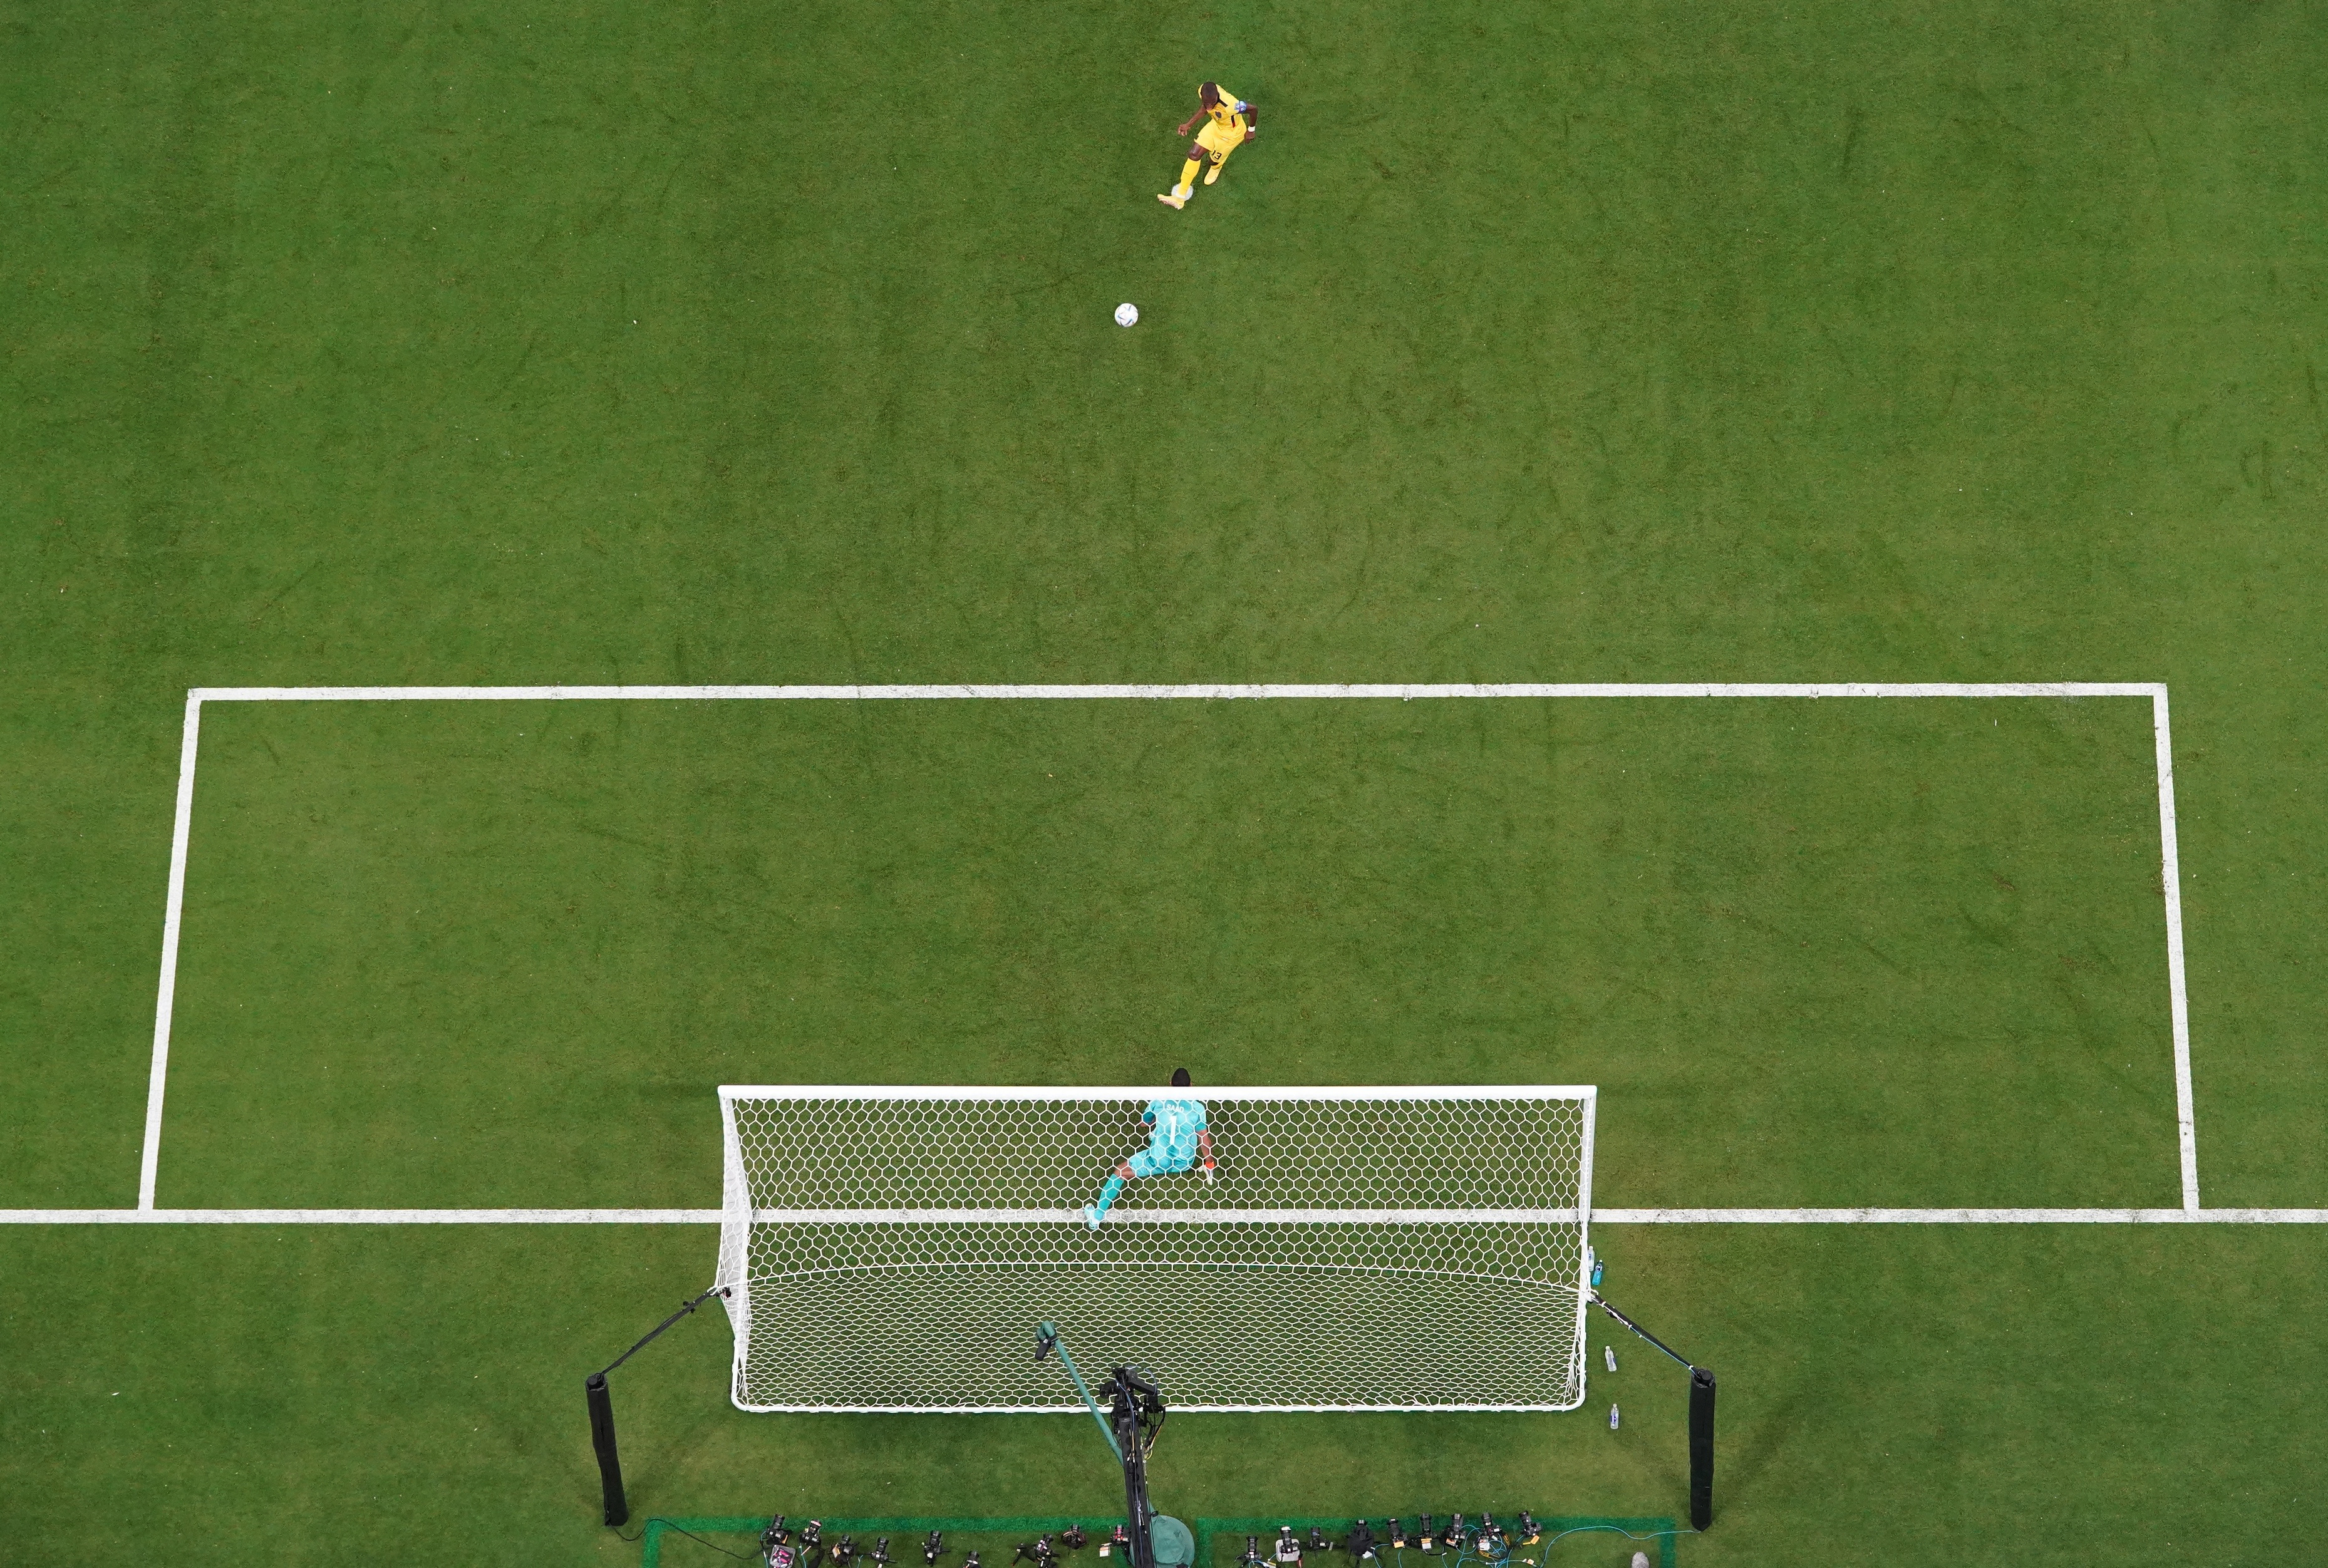 The flight of the ball and the goalkeeper's stretch (REUTERS/Kai Pfaffenbach)